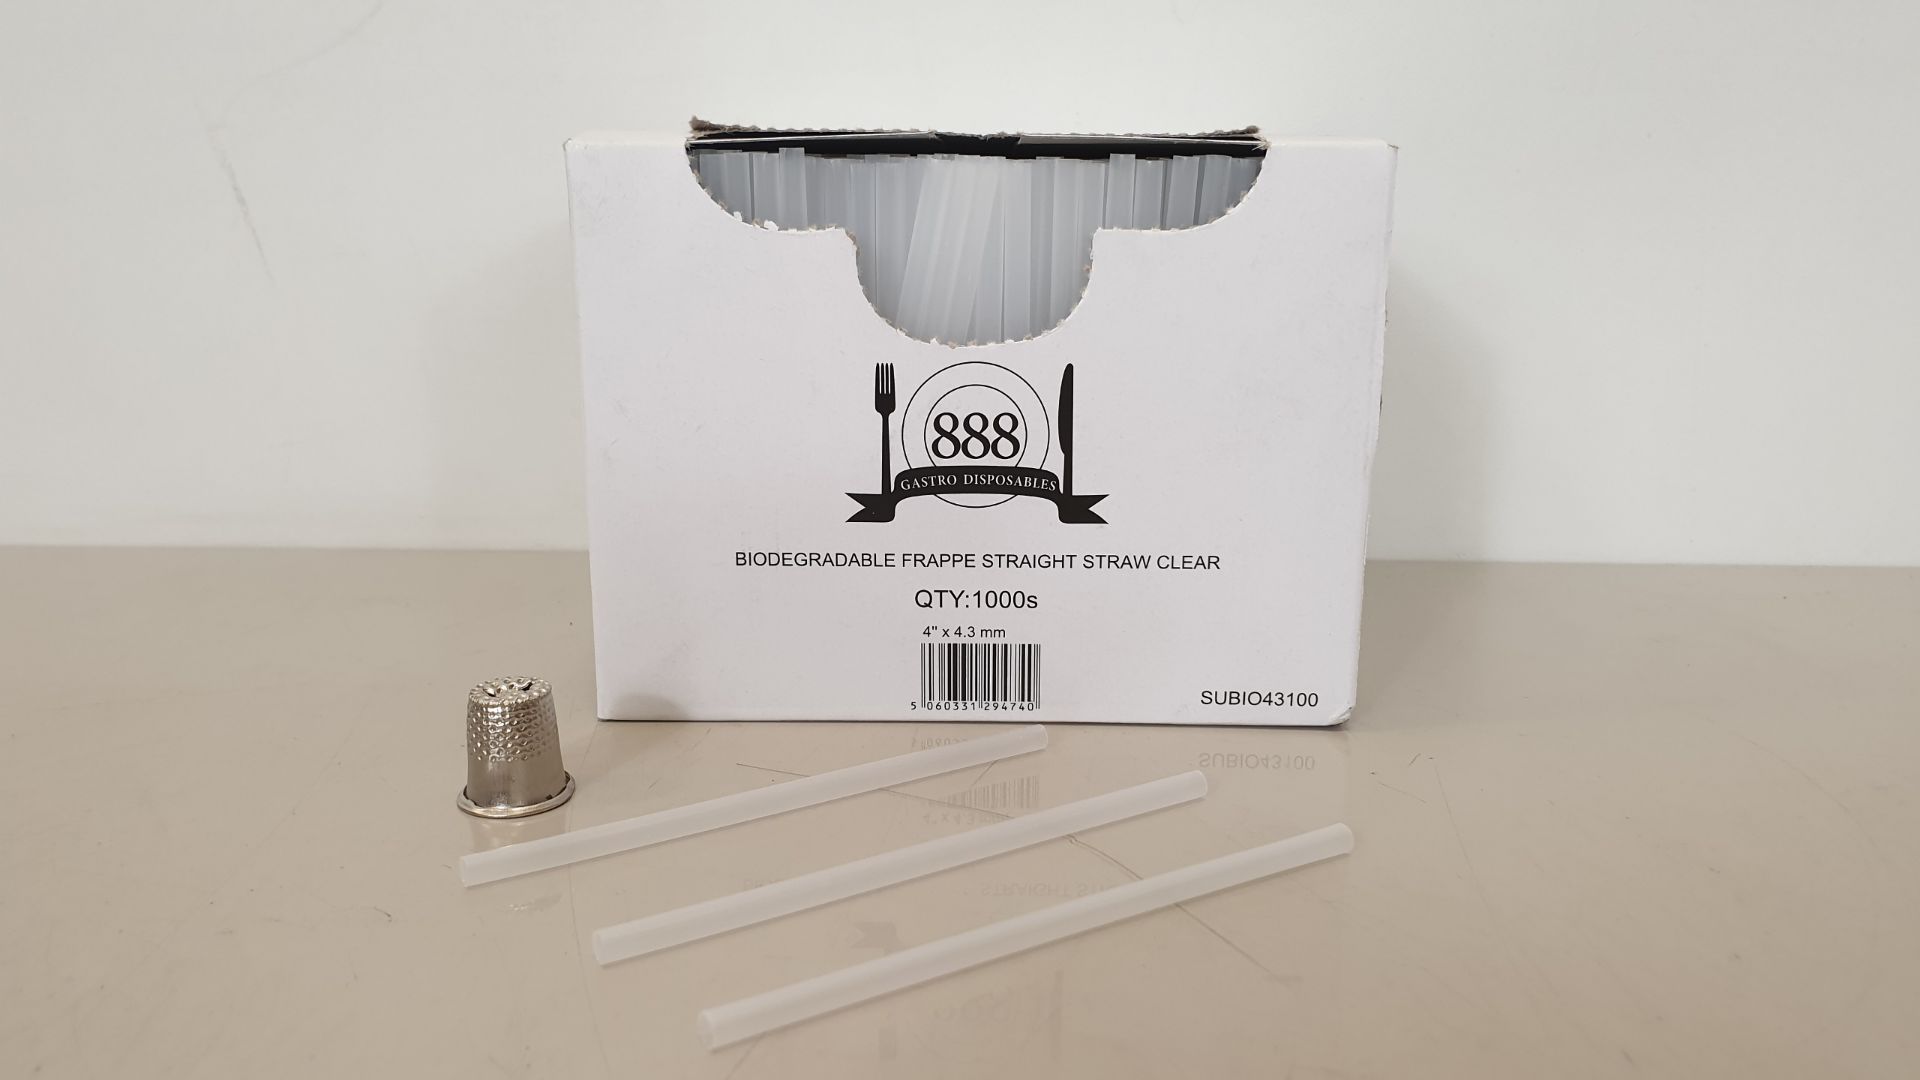 20,000 X BIODEGRADABLE FRAPPE STRAIGHT STRAW CLEAR (20 X 1000) - IN 1 CARTON